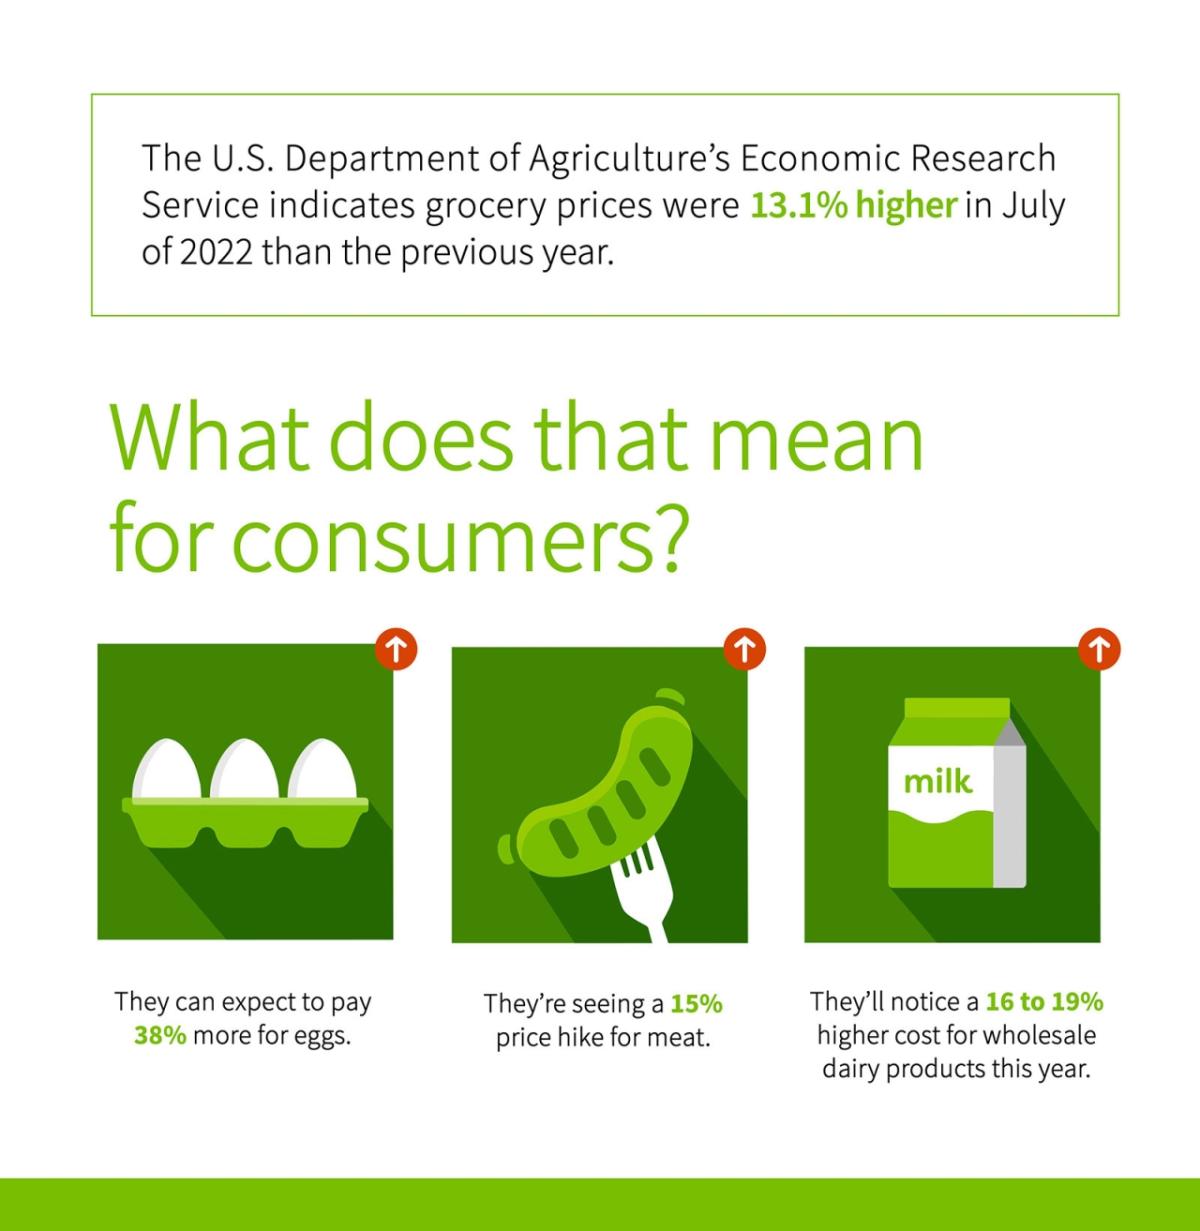 USDA economic research info graphic. Grocery prices were 13.2% higher in July 2022 than the previous year. Pictures of eggs, sausage, milk and their individual price increases.